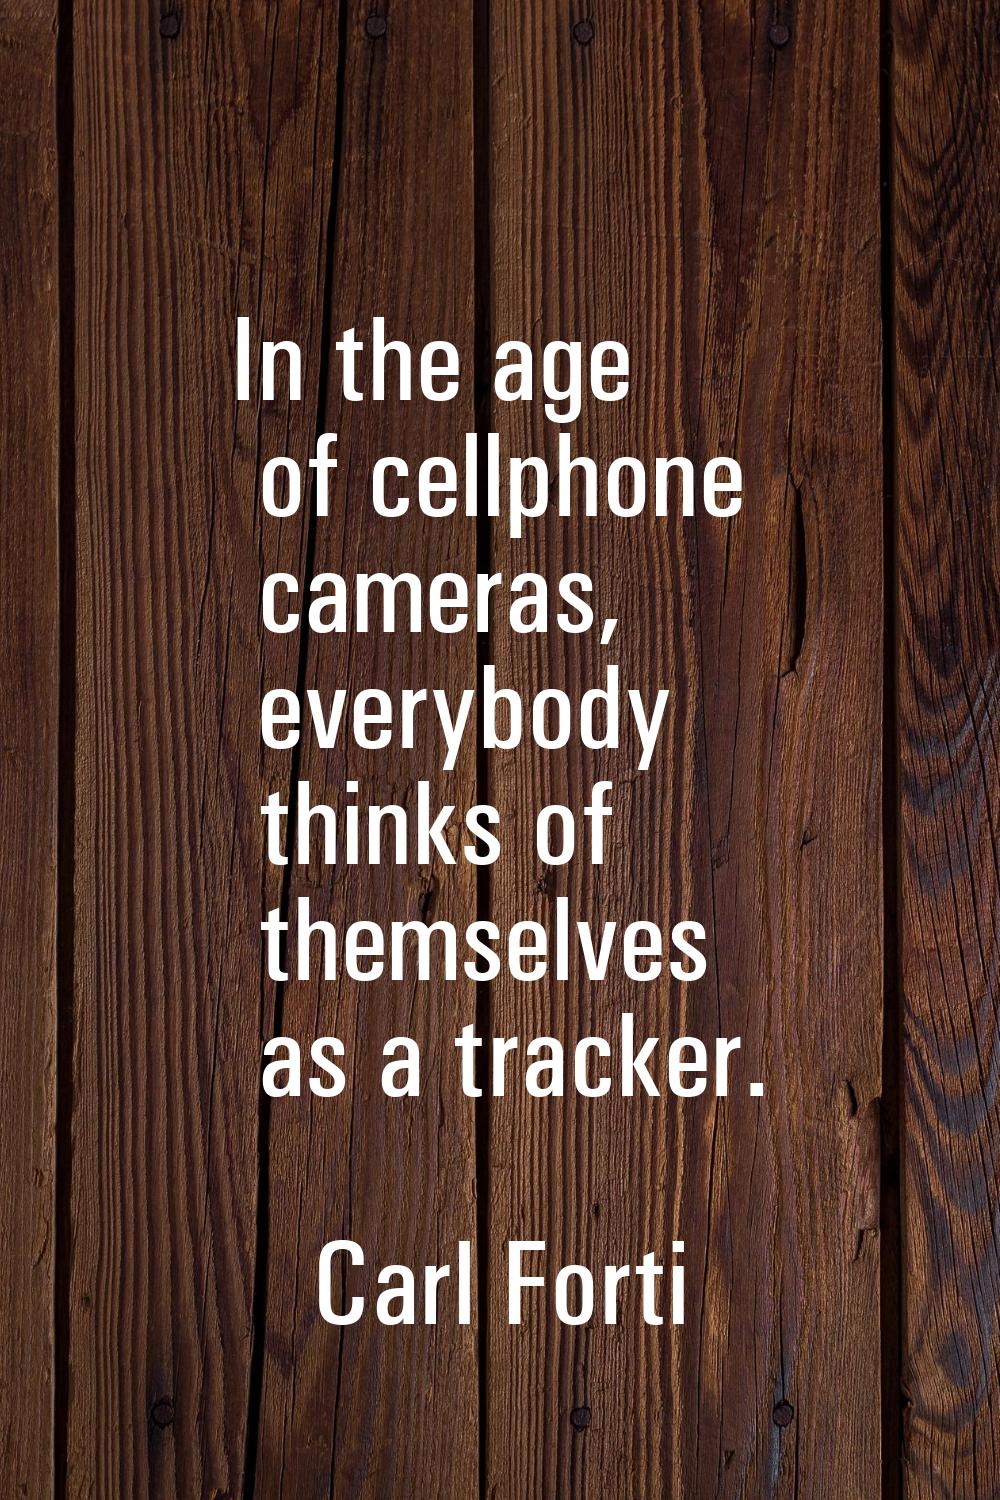 In the age of cellphone cameras, everybody thinks of themselves as a tracker.